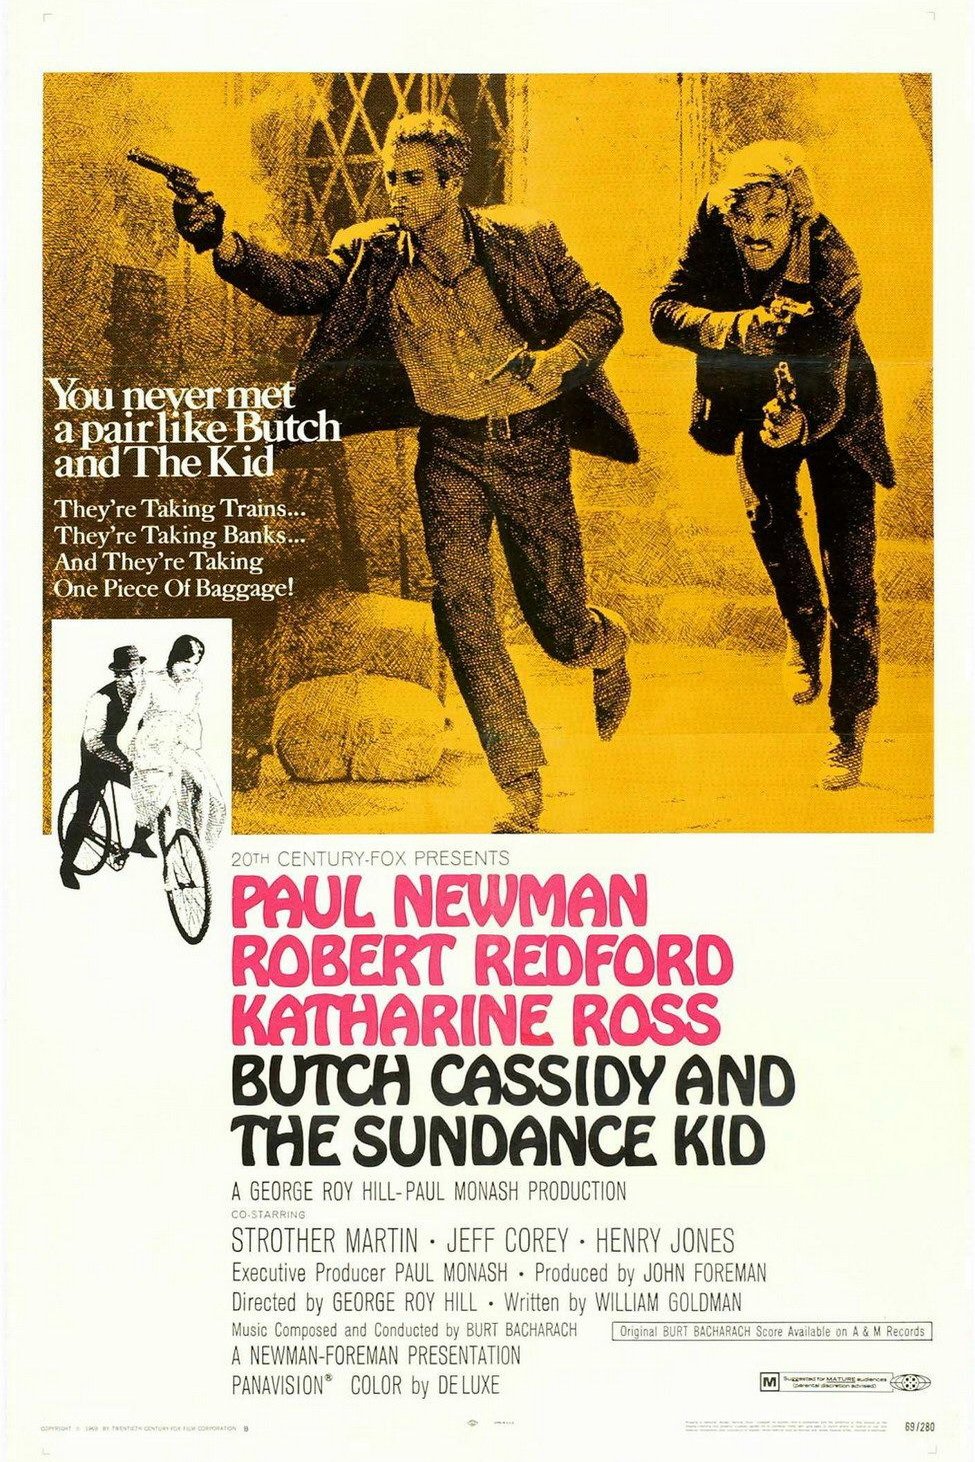 Poster of the movie Butch Cassidy and the Sundance Kid